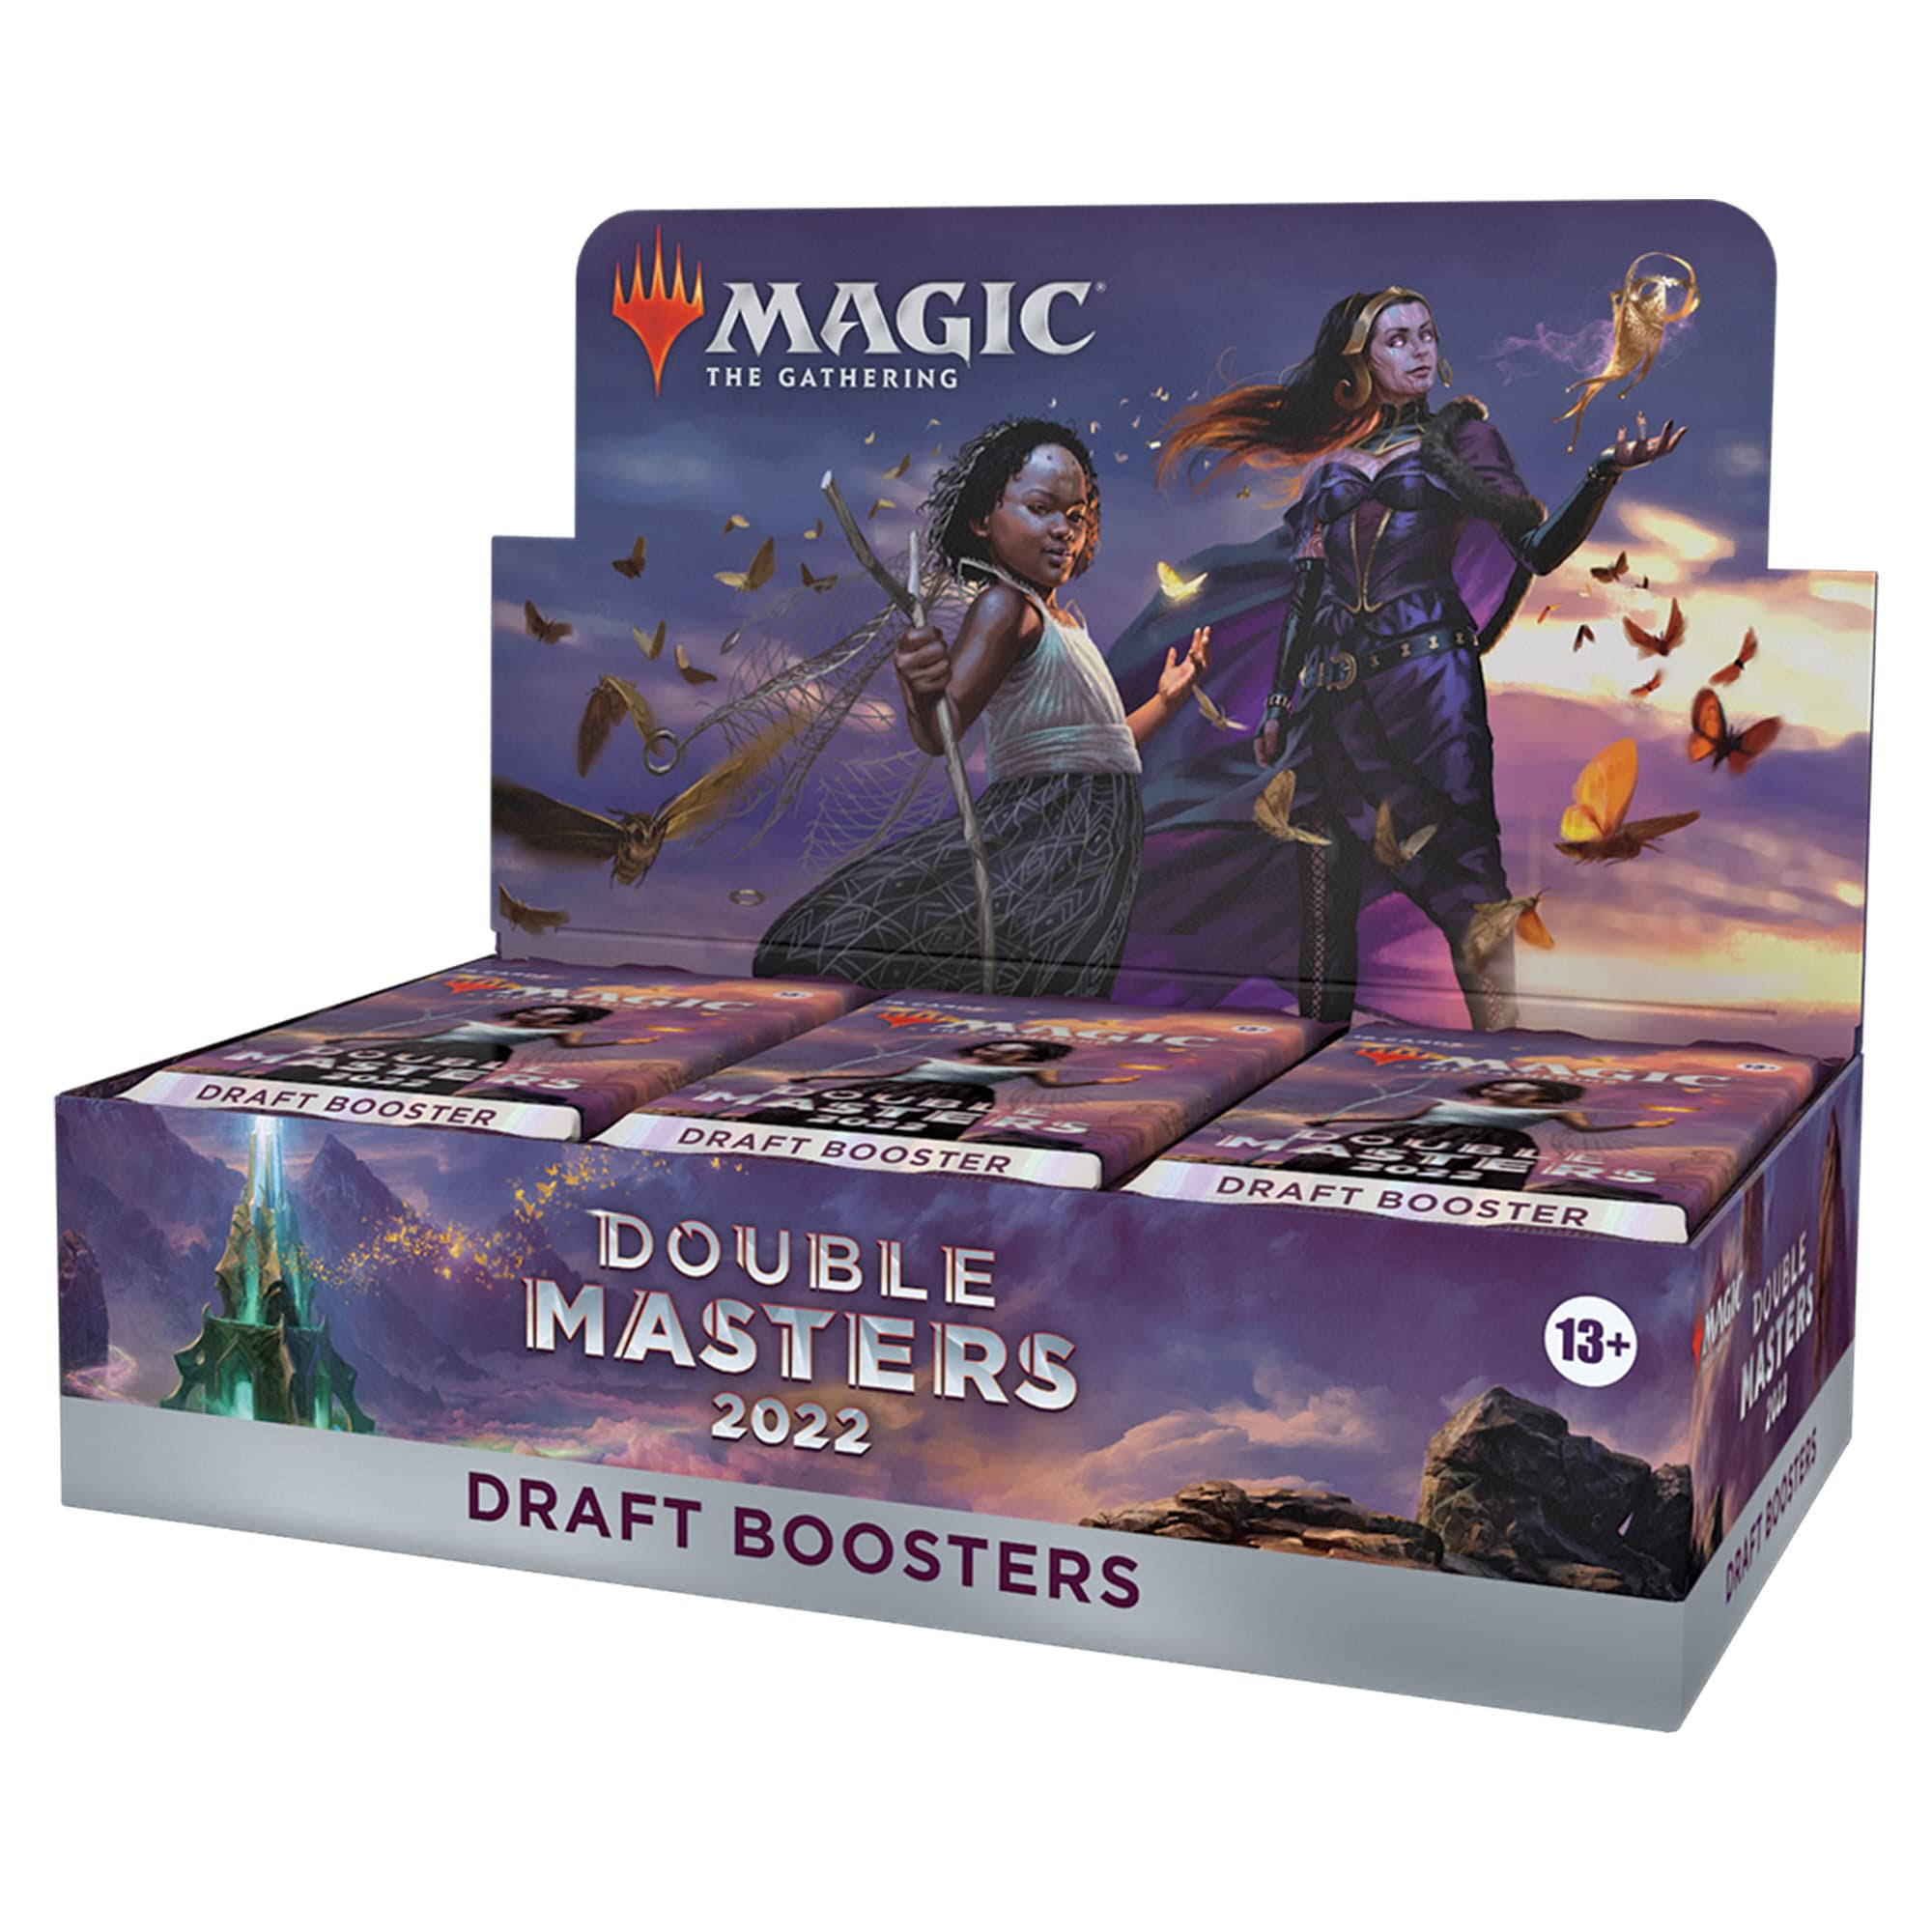 Magic The Gathering - Double Masters 2022 - Draft Booster Box